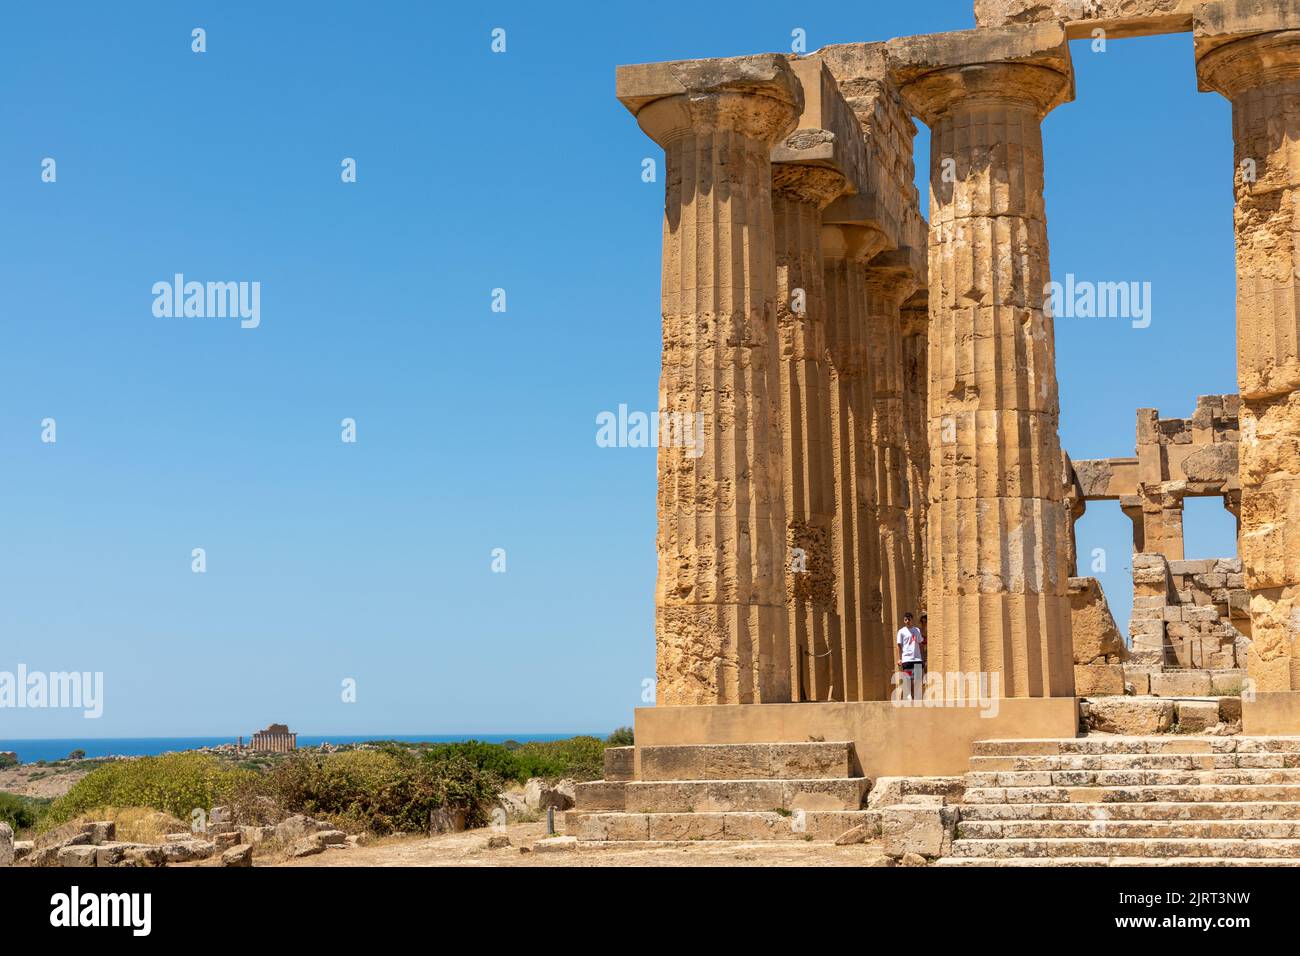 A view of the Temple of Juno, a Greek temple of the Doric order in the Valley of the Temples in Agrigento, Sicily, Italy Stock Photo